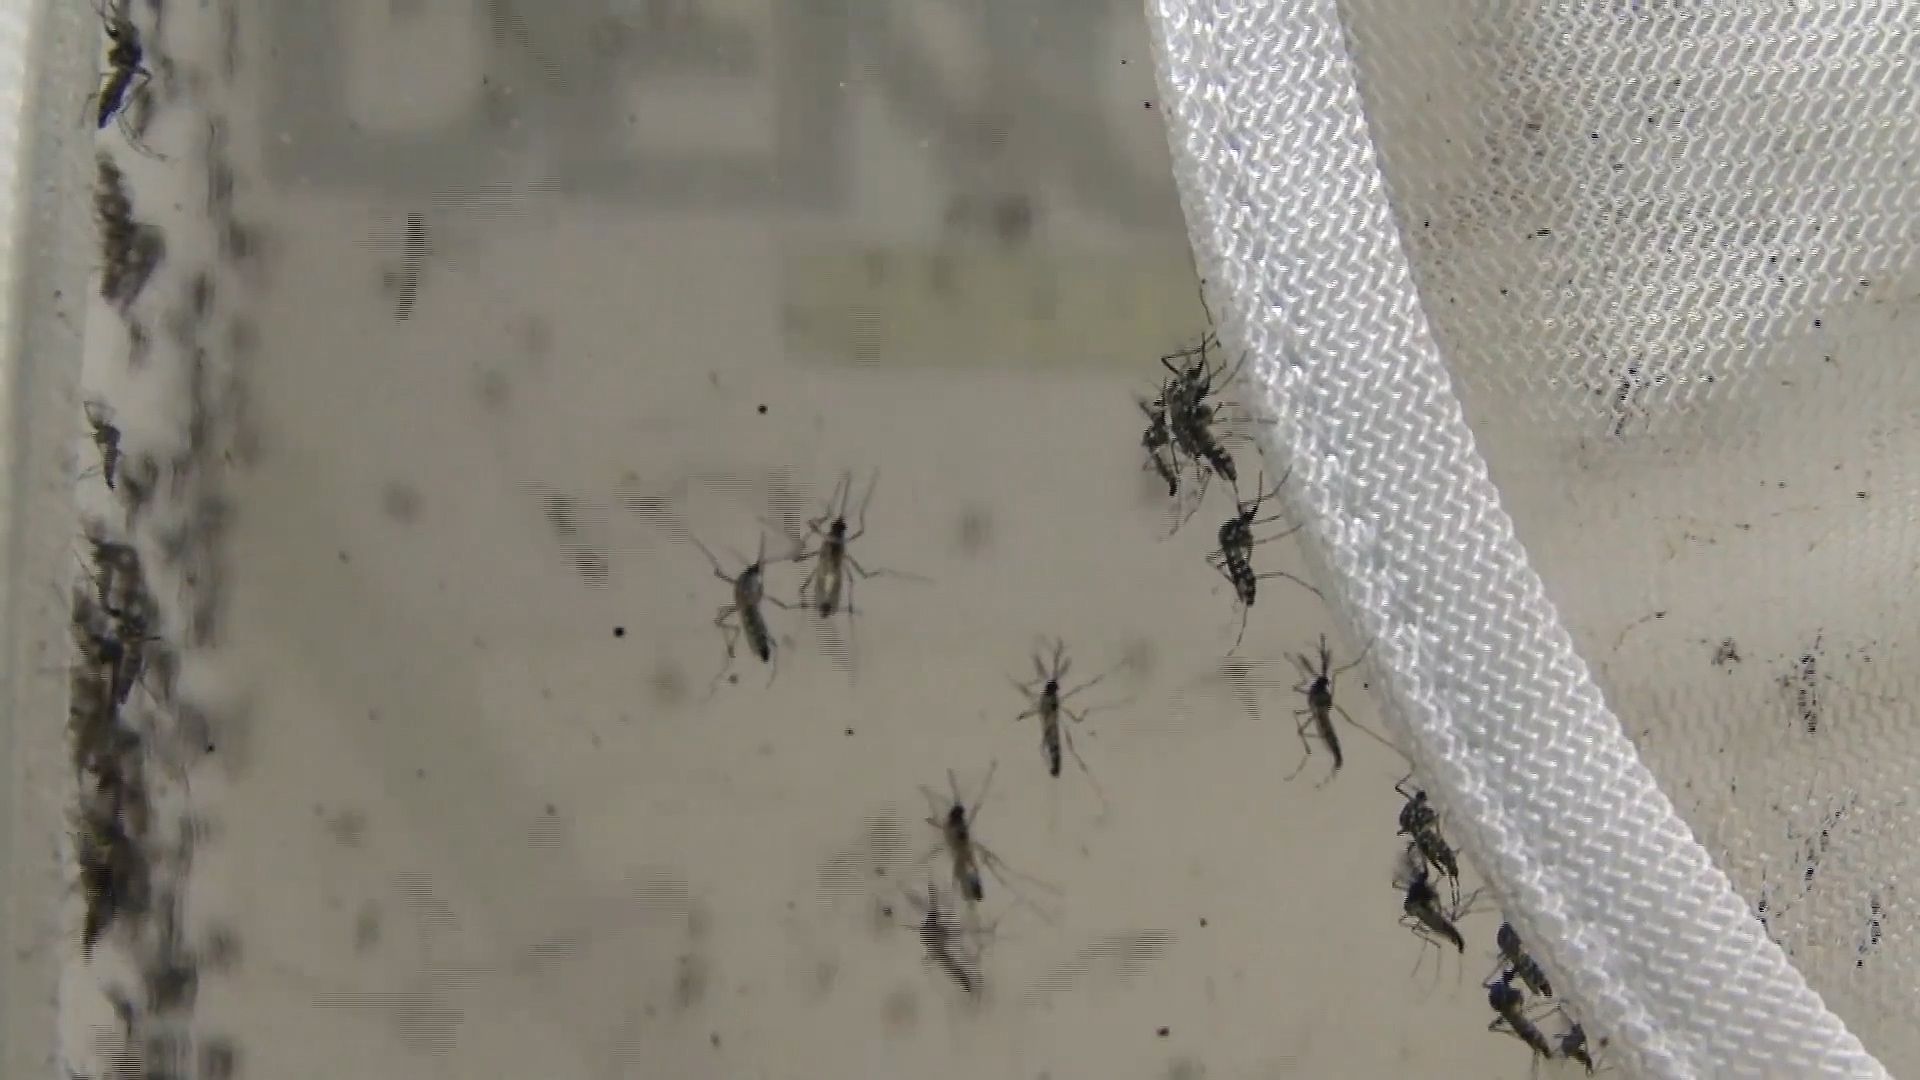 Hear about testing the effectiveness of lab-grown mosquitoes carrying Zika-blocking bacterium to combat the virus spread in Brazil, a part of “Eliminate Dengue” program